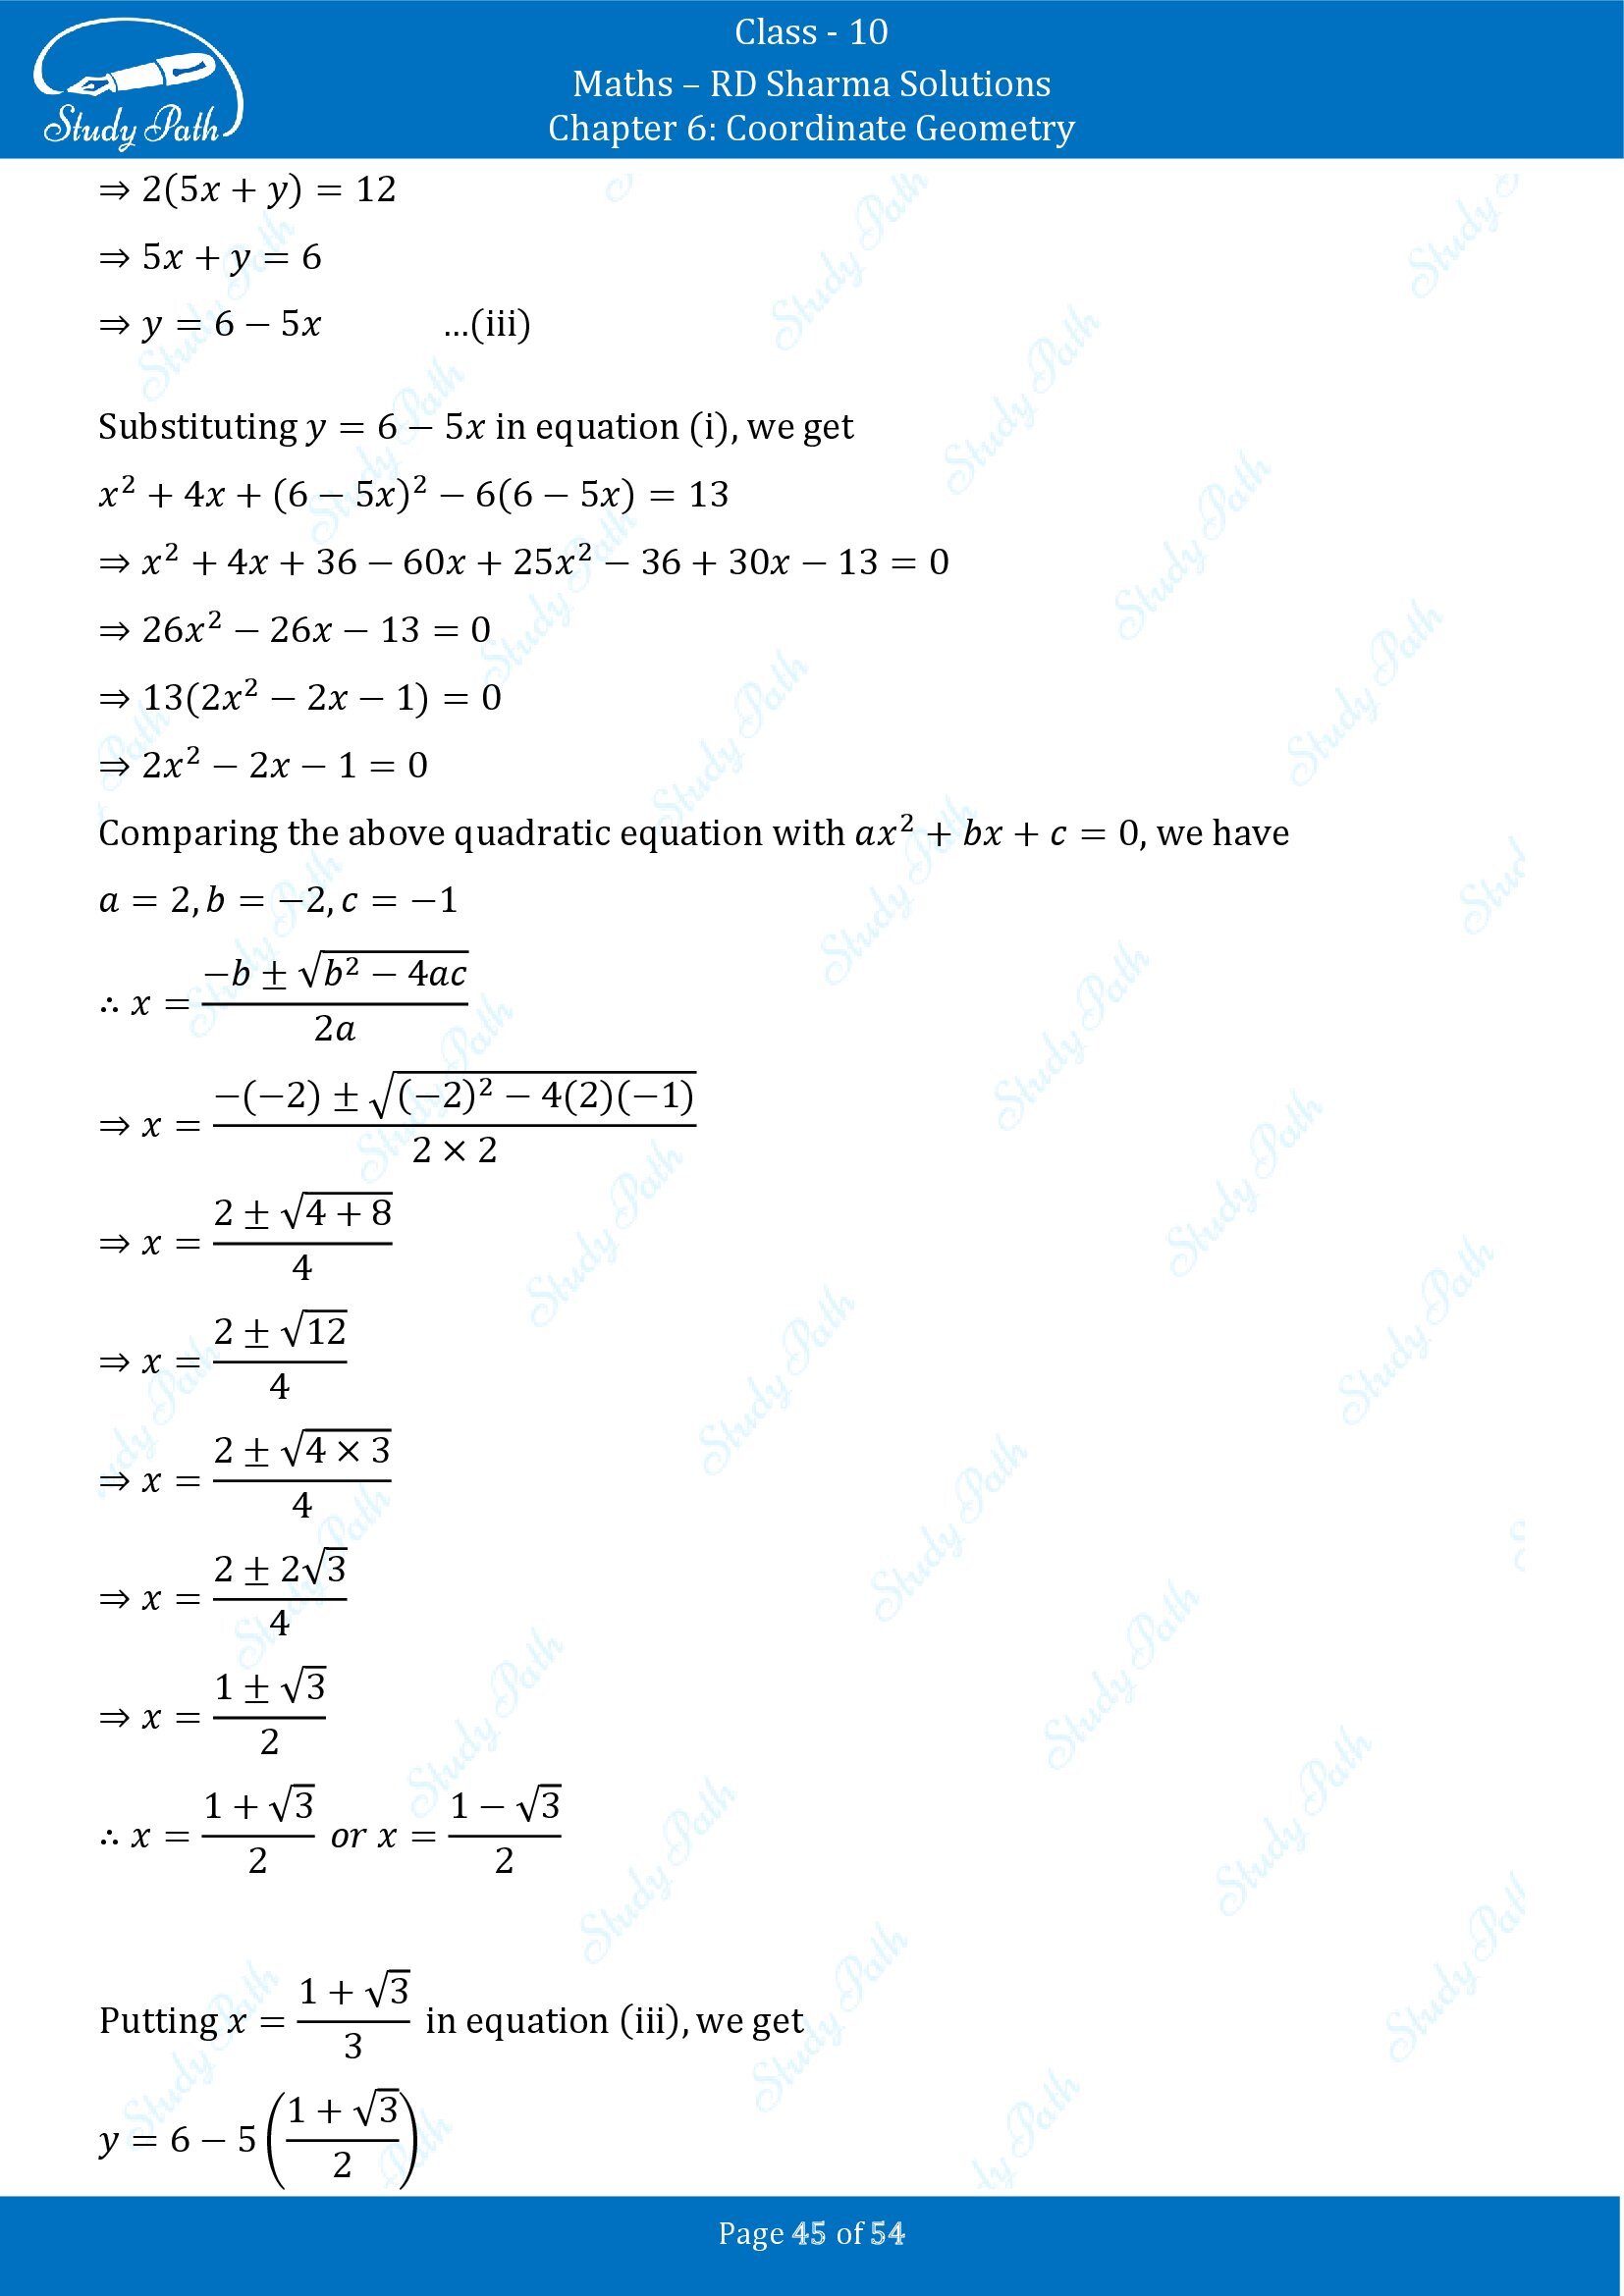 RD Sharma Solutions Class 10 Chapter 6 Coordinate Geometry Exercise 6.2 0045